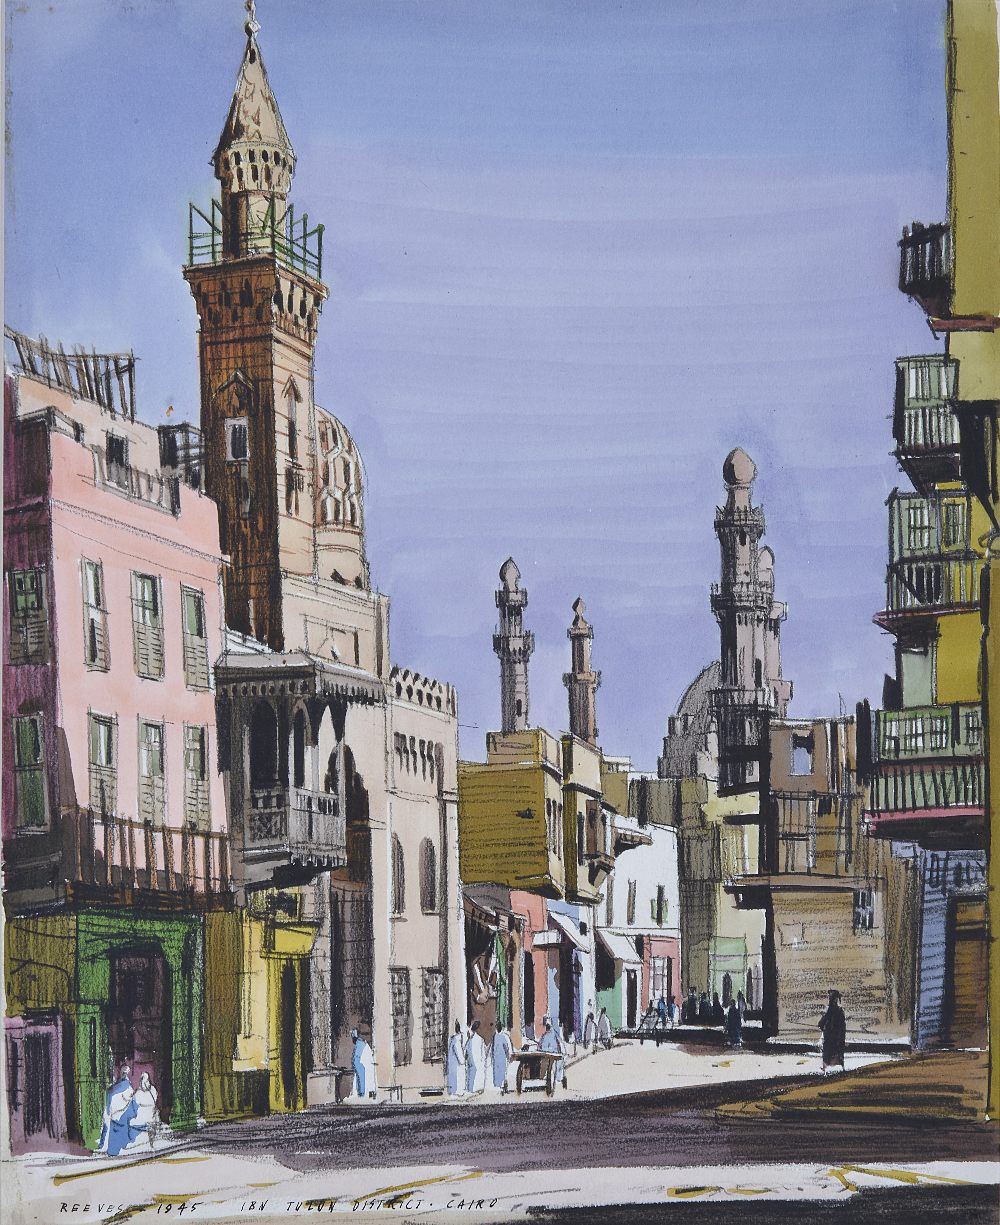 FREDERICK REEVES (FL.1944-45) `IBN TULON DISTRICT, CAIRO` signed, dated 1945 and inscribed with